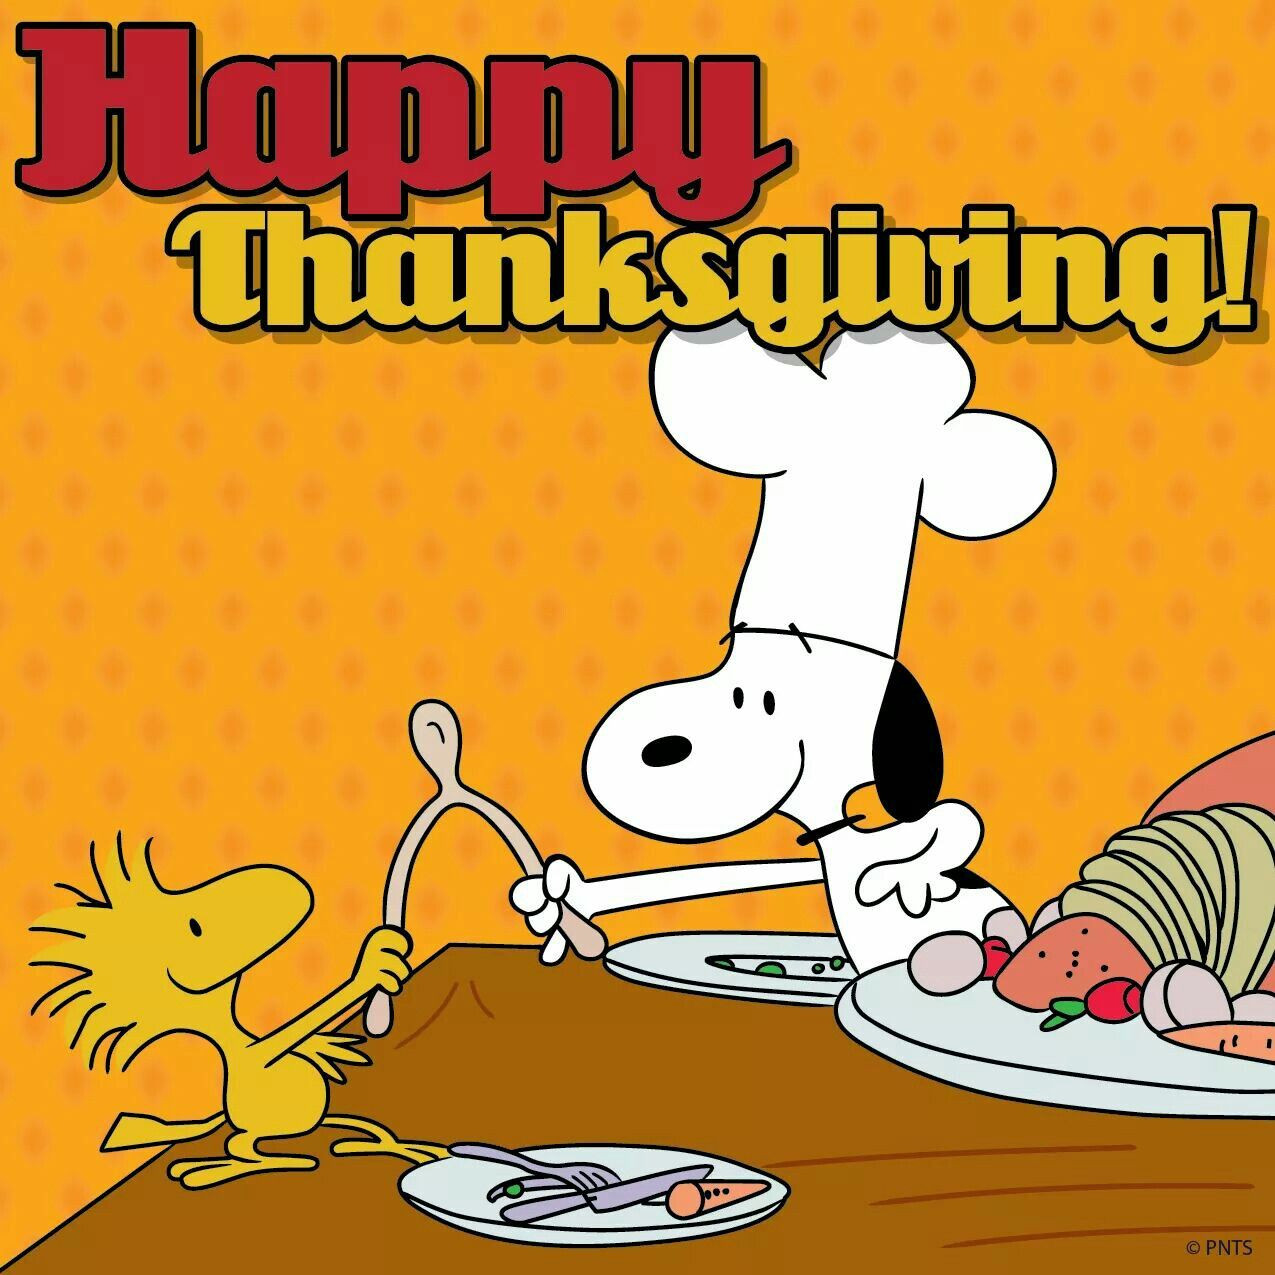 Thanksgiving Quotes Snoopy
 Snoopy Thanksgiving